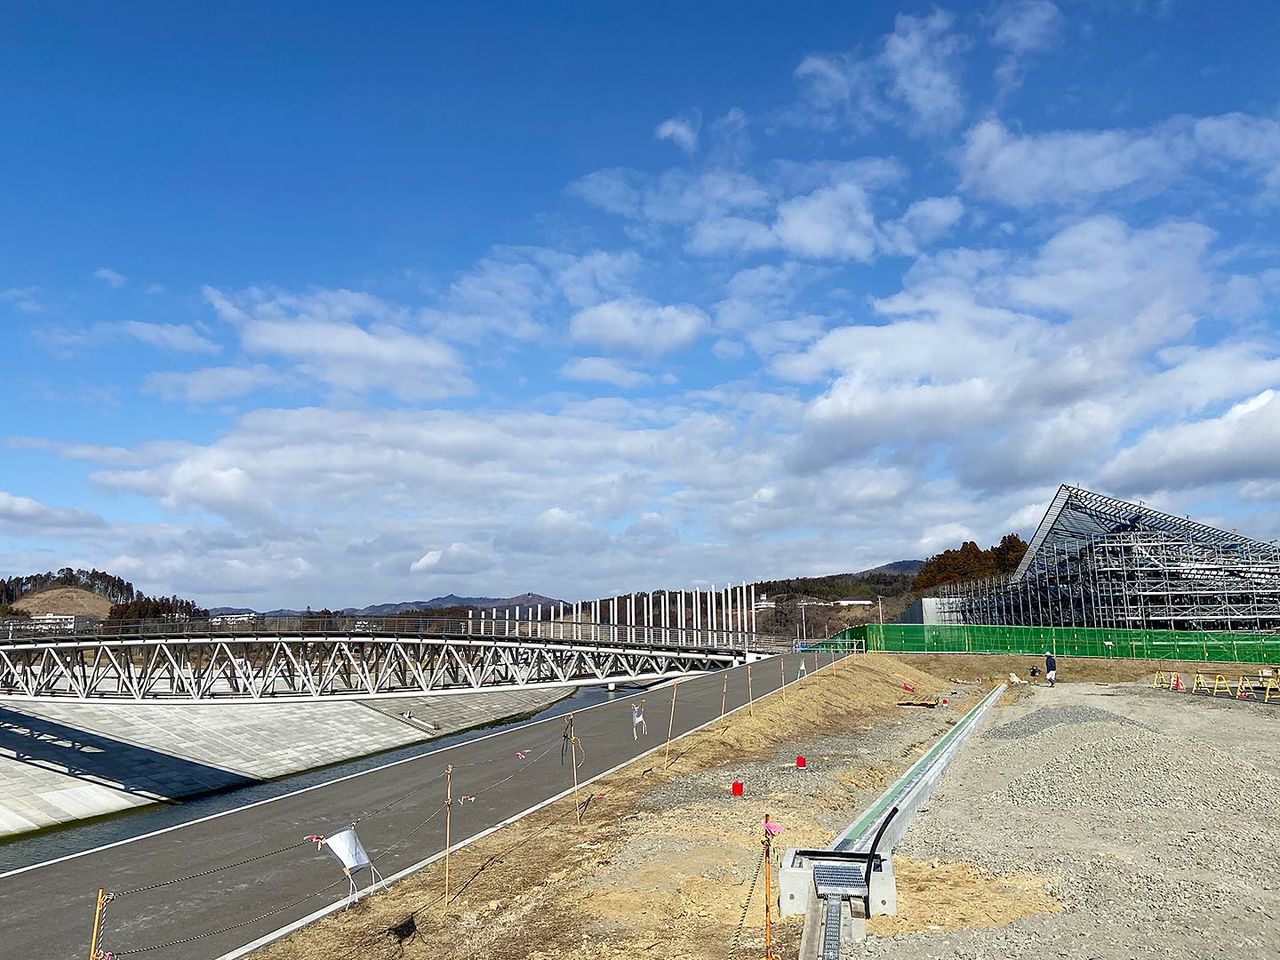 After the earthquake, Minamisanriku’s entire town center was raised some 10 meters higher than before, and the bridges across the river were also rebuilt. At  right is the Minamisanriku 311 Memorial construction site, designed by architect Kuma Kengo to preserve the memory of the disaster.